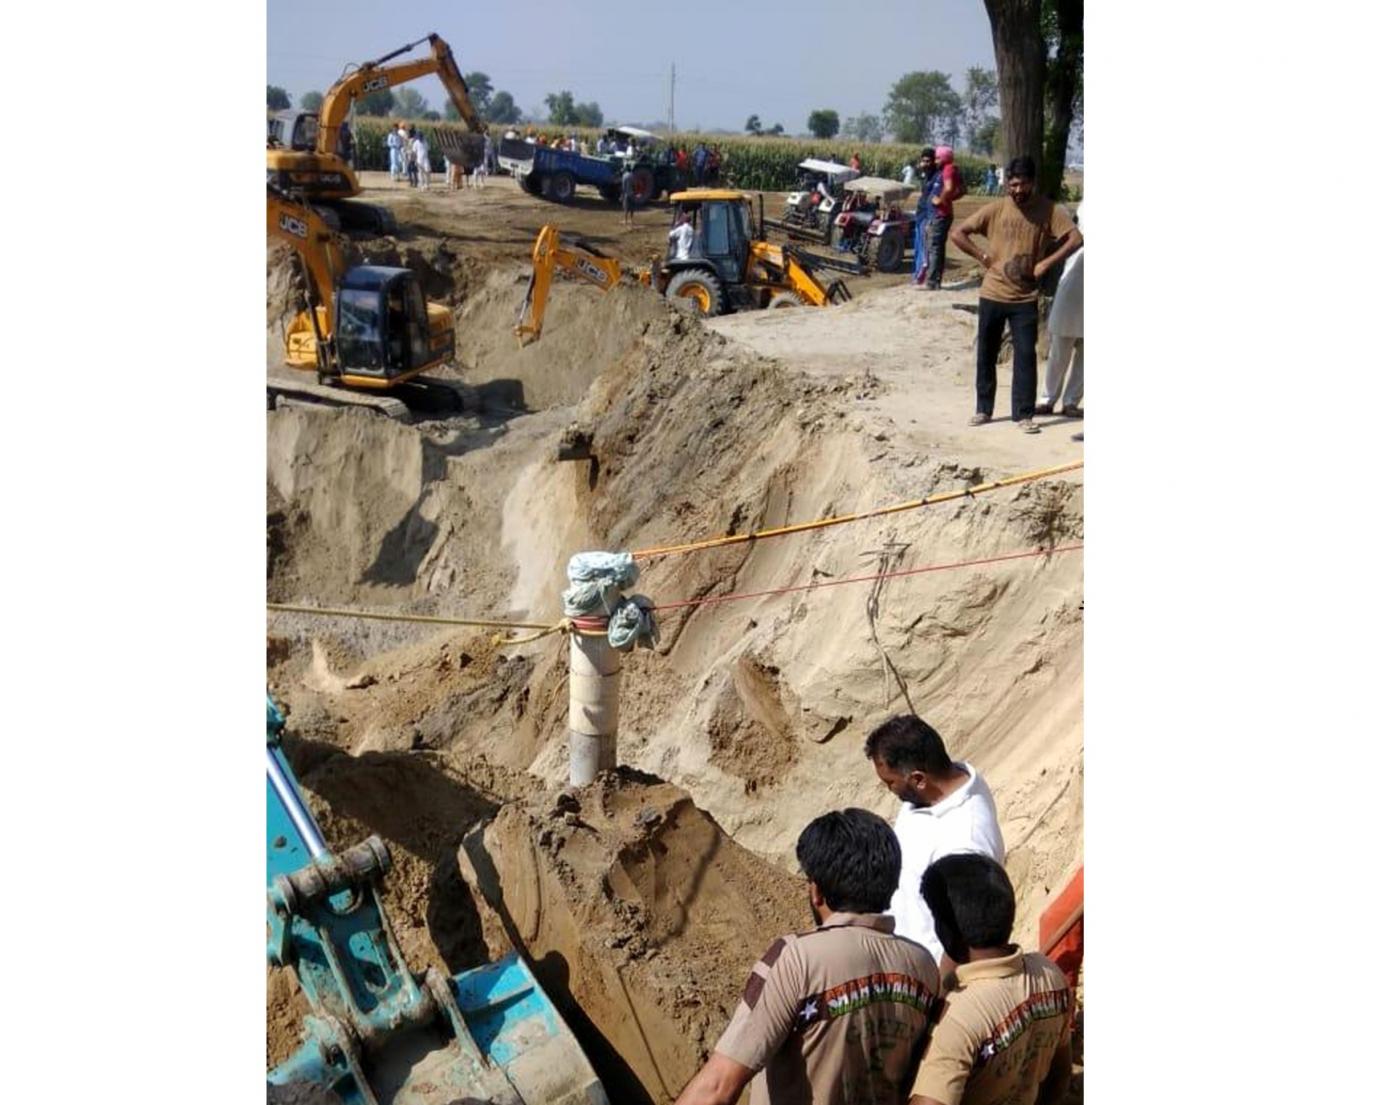 Sangrur: Rescue operations underway to rescue a two-year-old boy who fell into a 150-foot narrow abandoned borewell in a village in Punjab's Sangrur district over 24 hours ago, on June 7, 2019. (Photo: IANS) by .